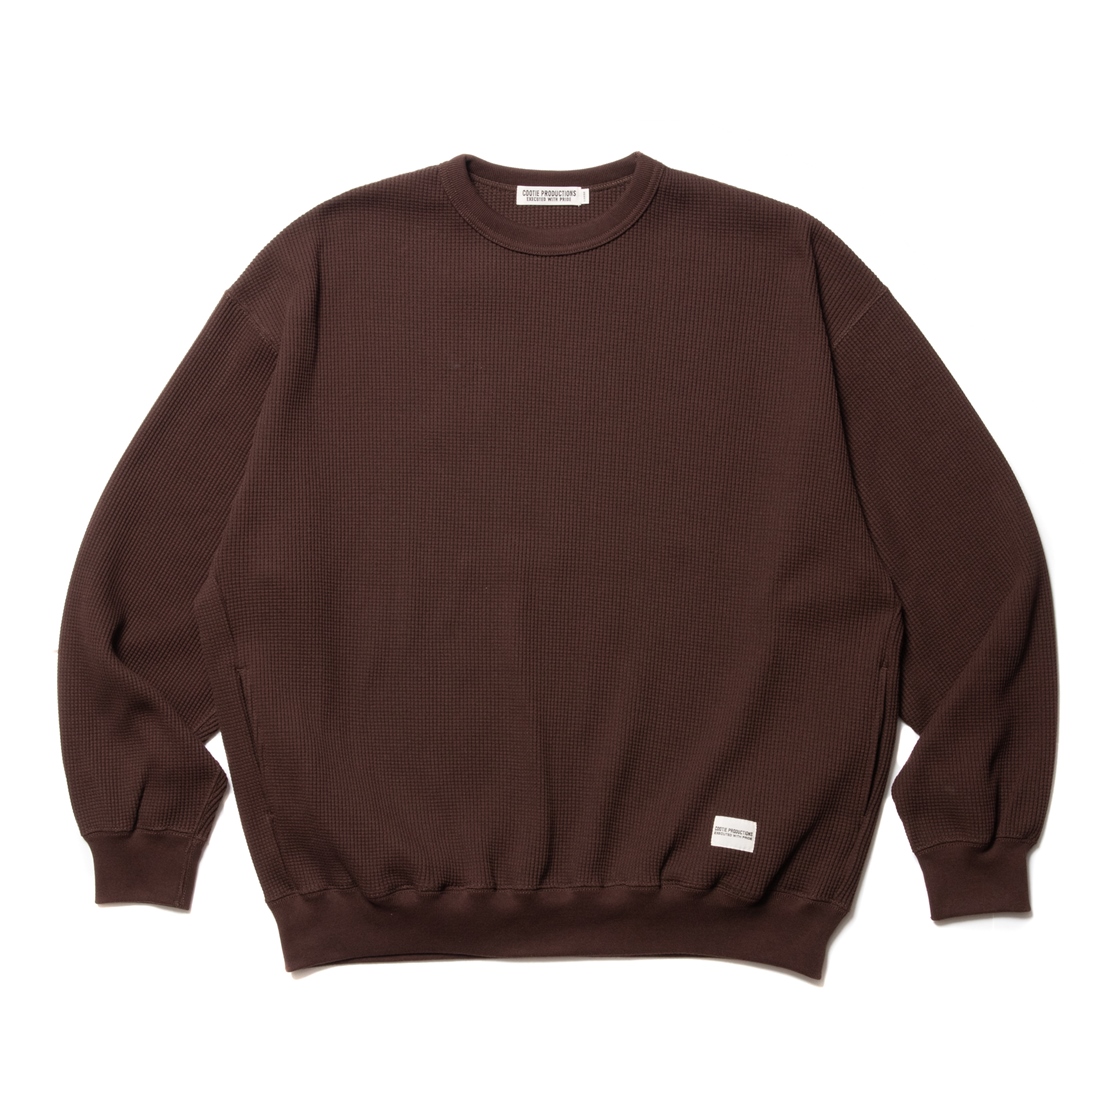 COOTIE Suvin Waffle L/S Crew